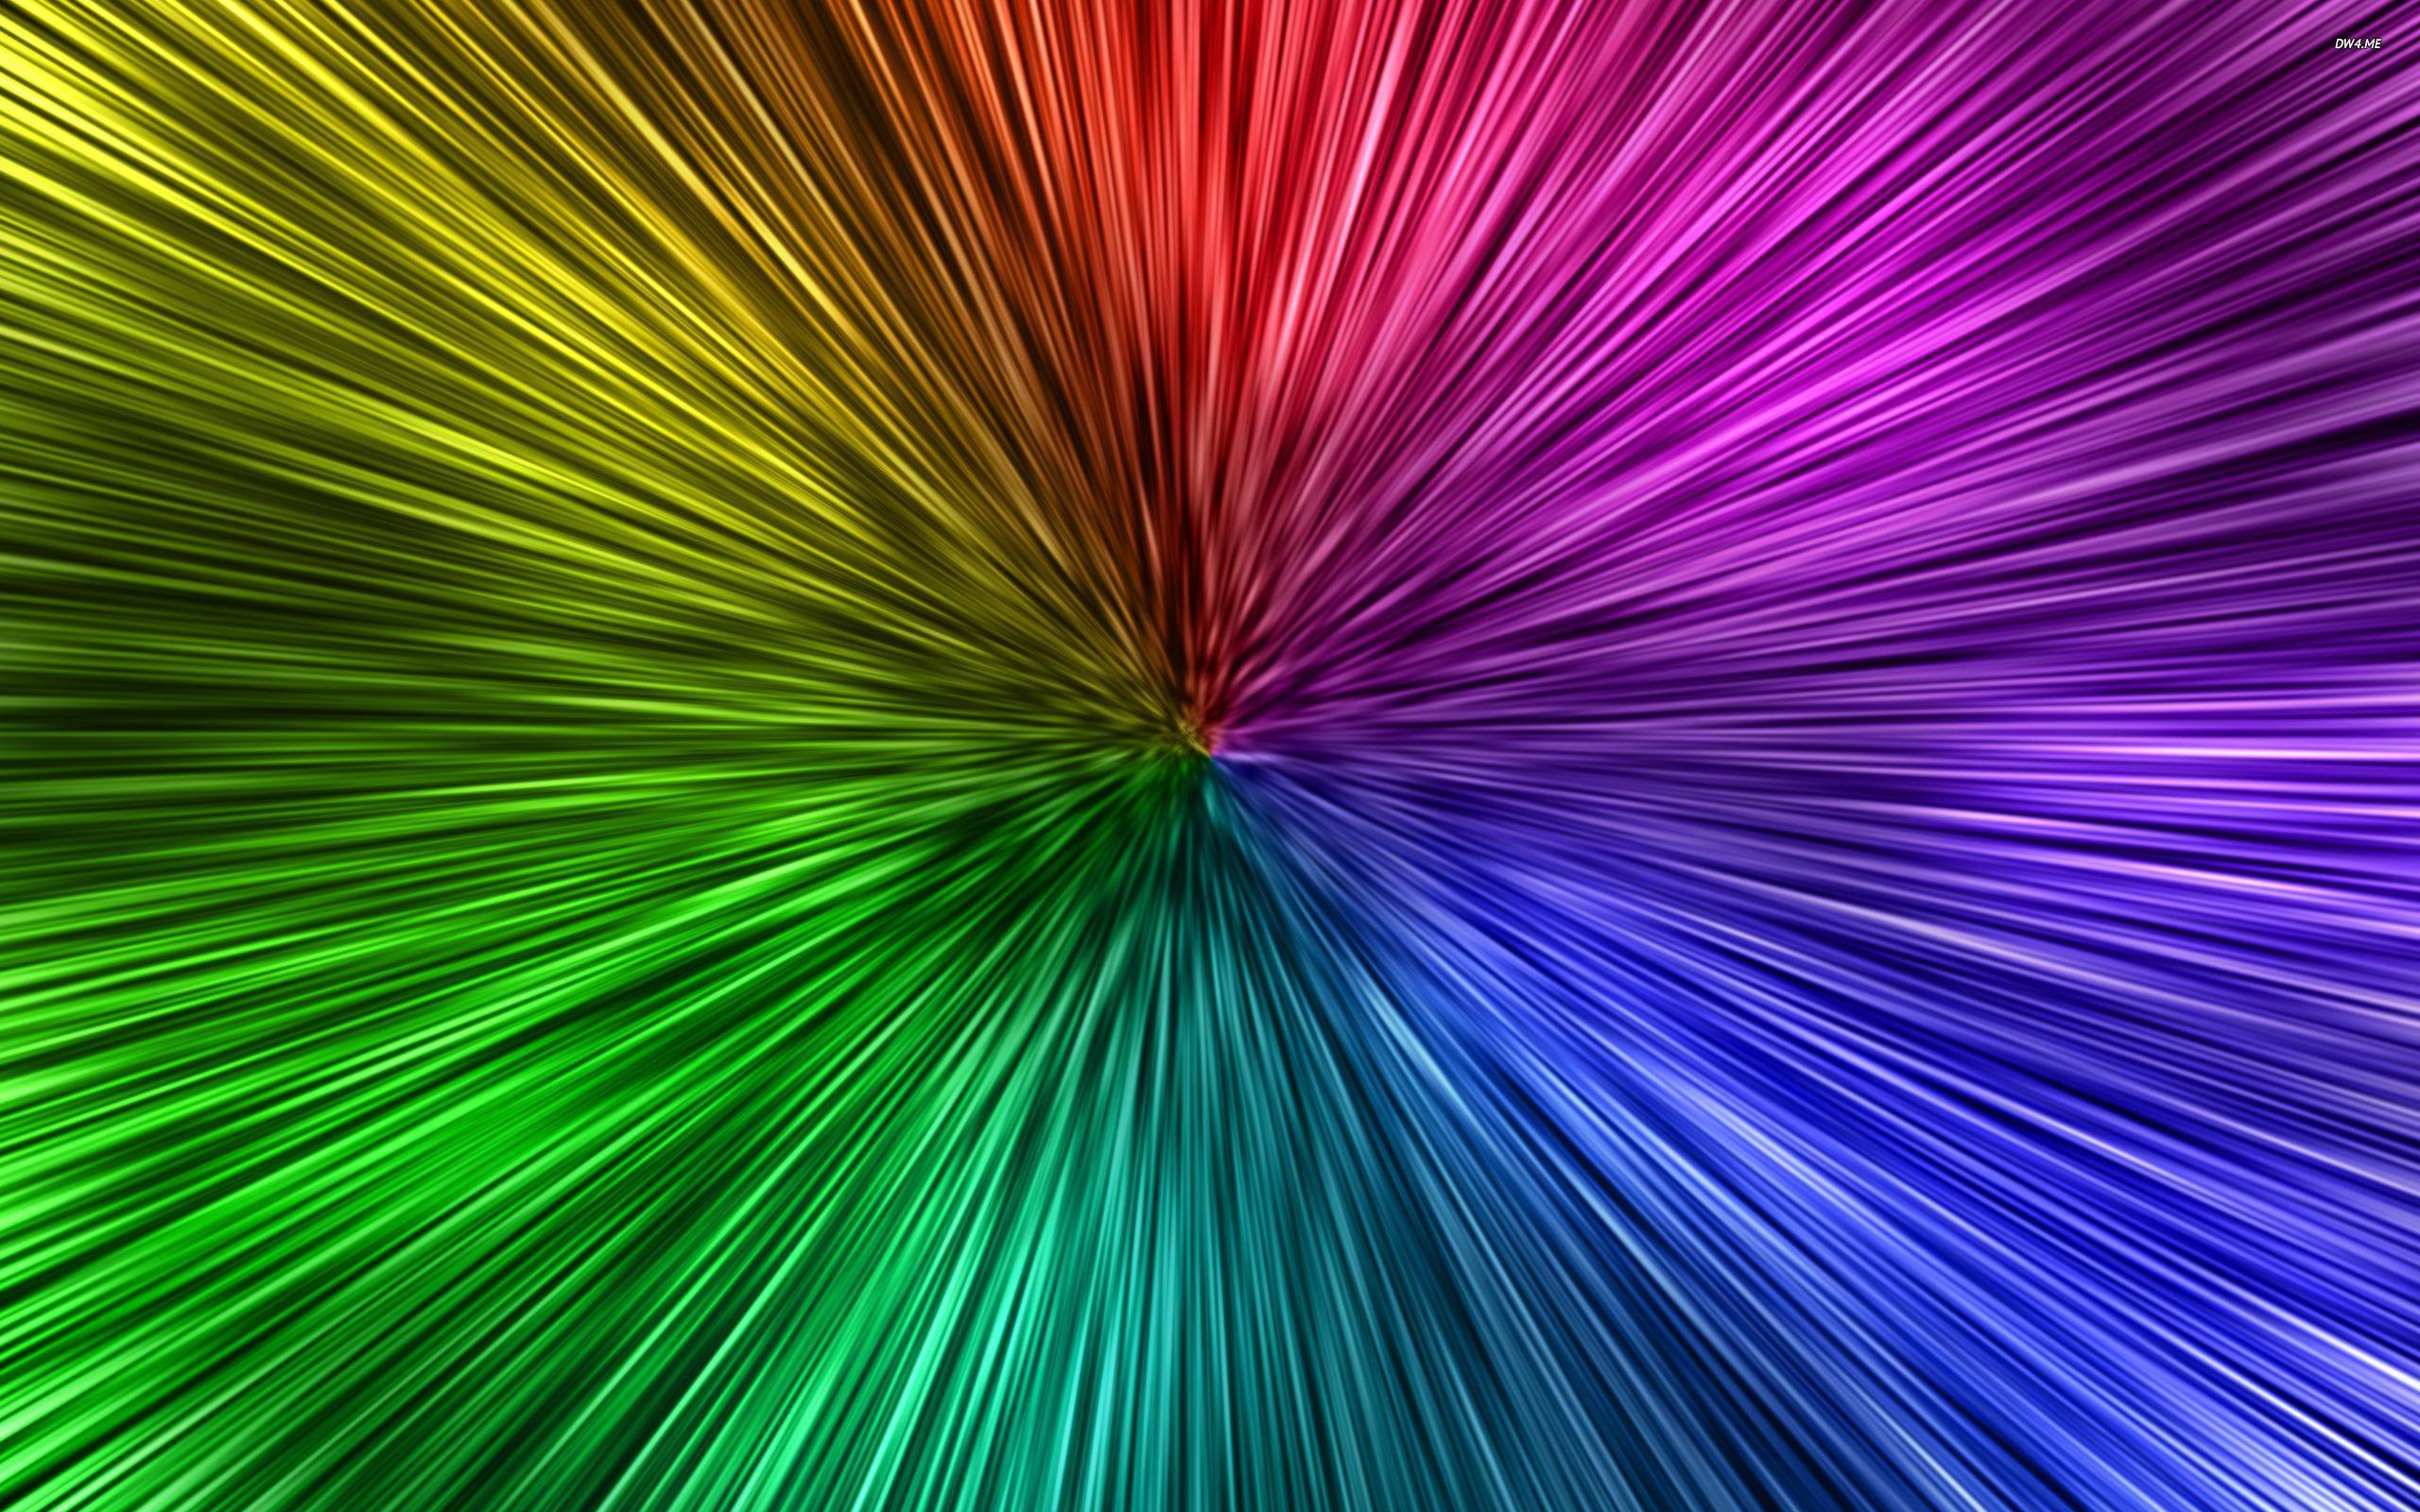 2560x1600 Image - Abstract-Neon-Wallpaper-Background-12.jpg - Neon colors